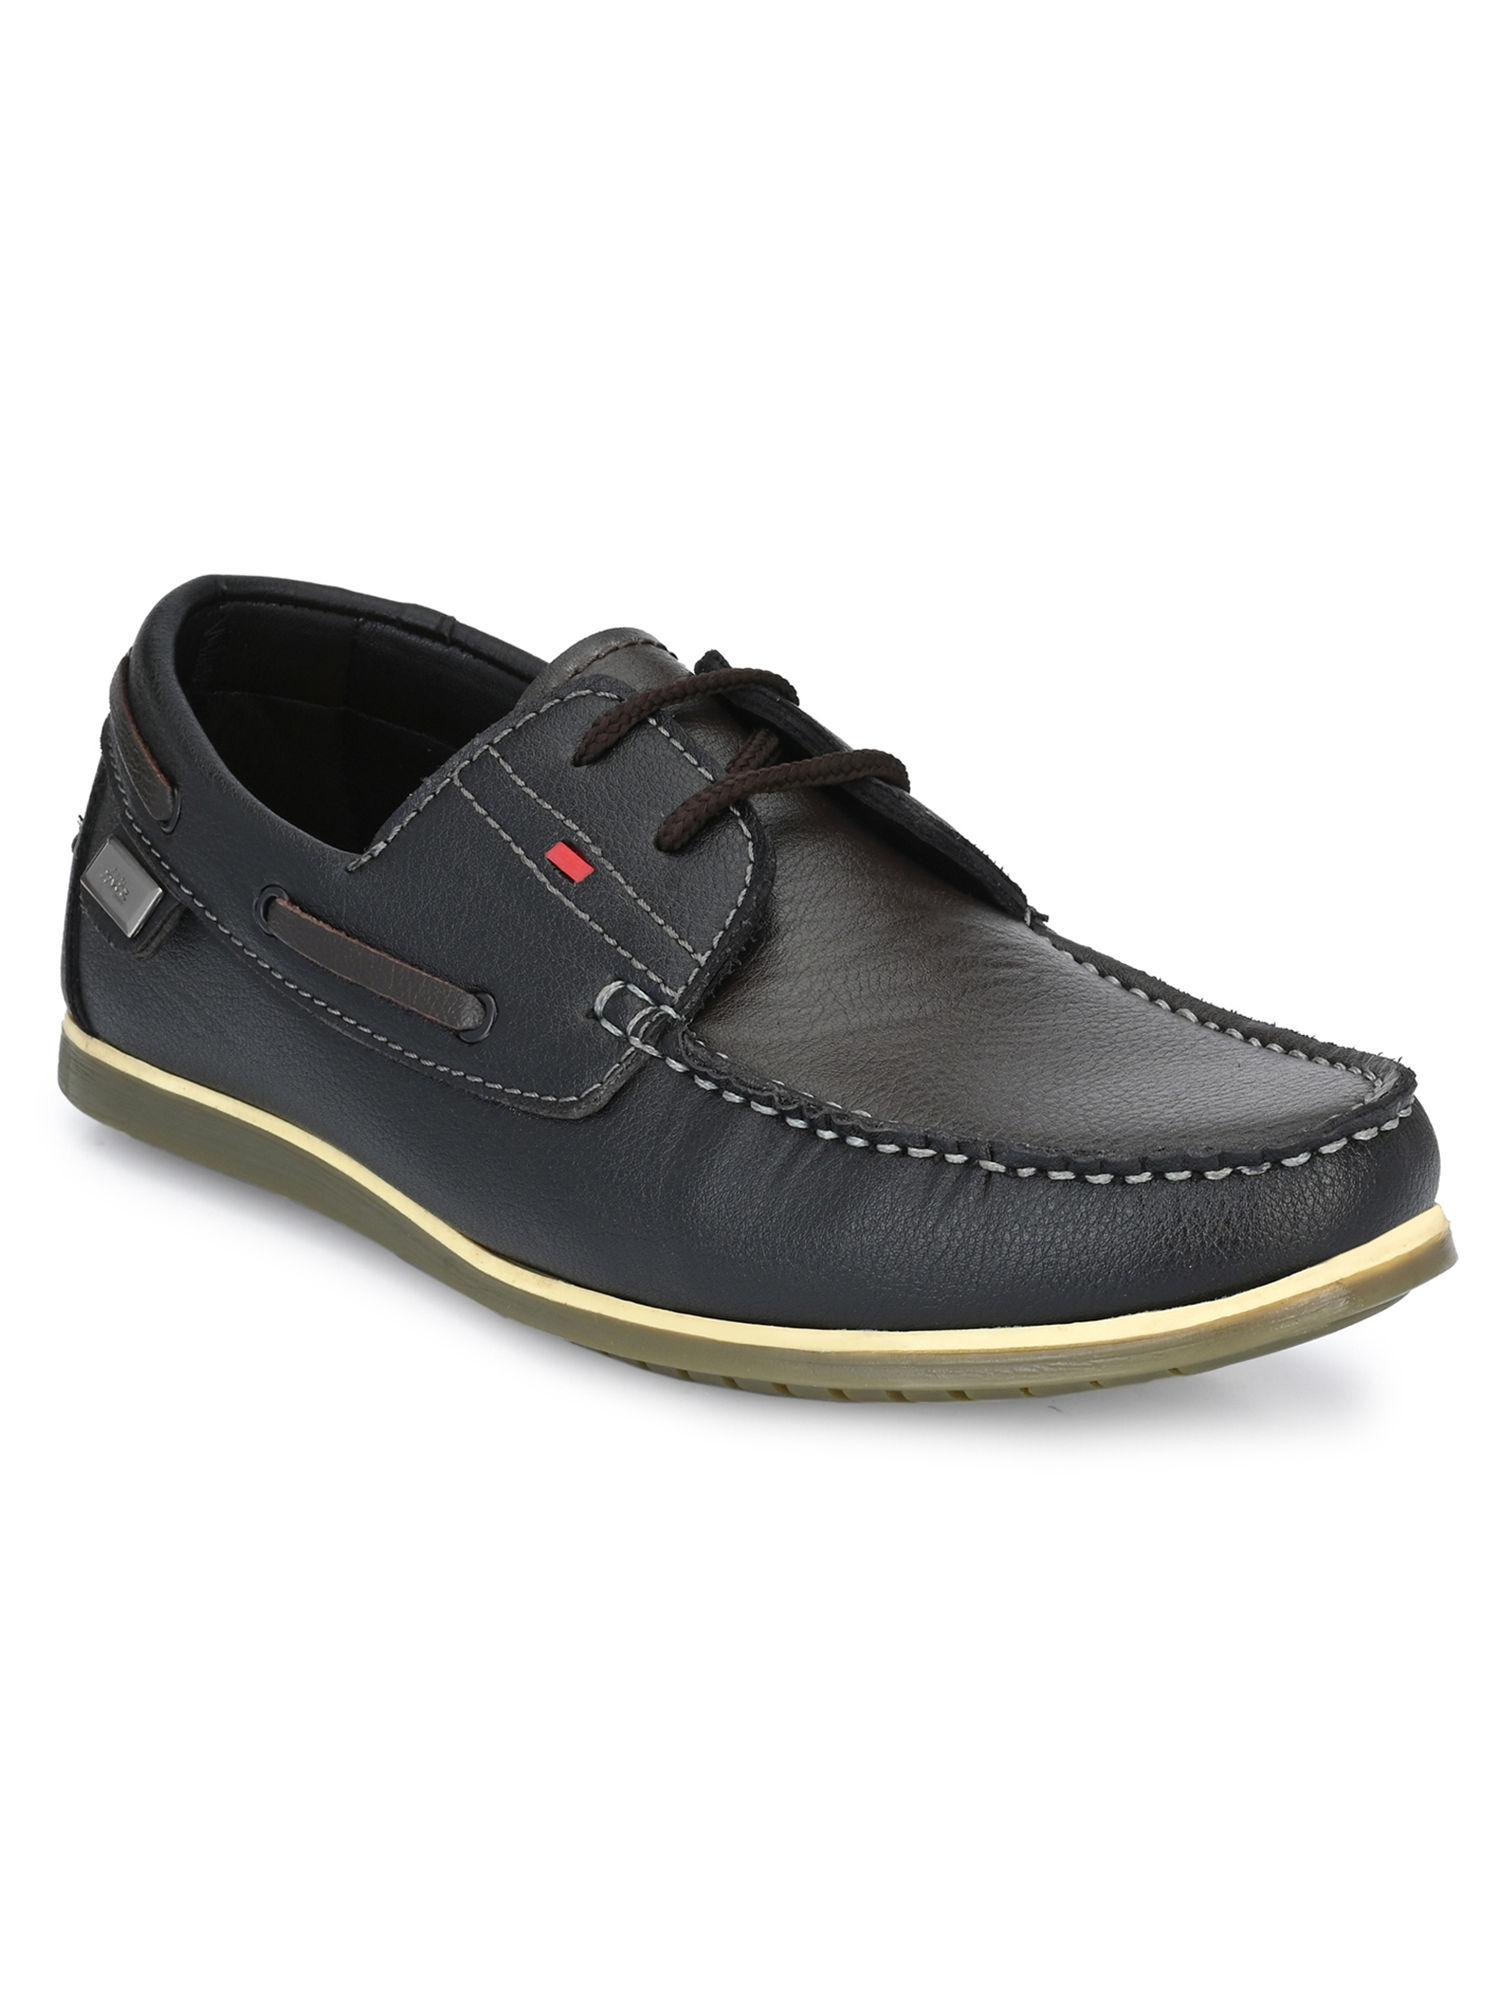 men's black synthetic slip-on casual boat shoes